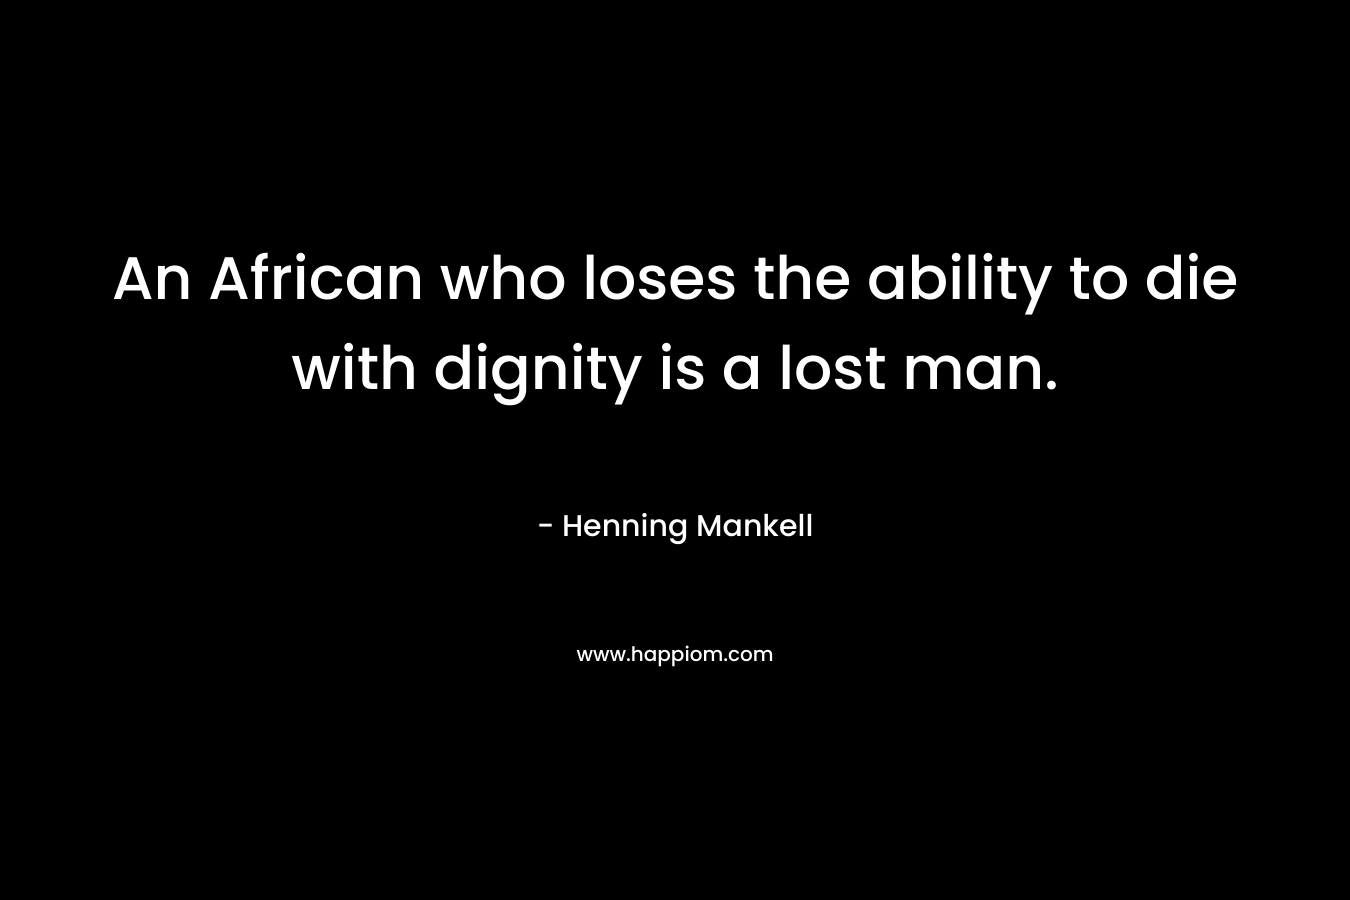 An African who loses the ability to die with dignity is a lost man.